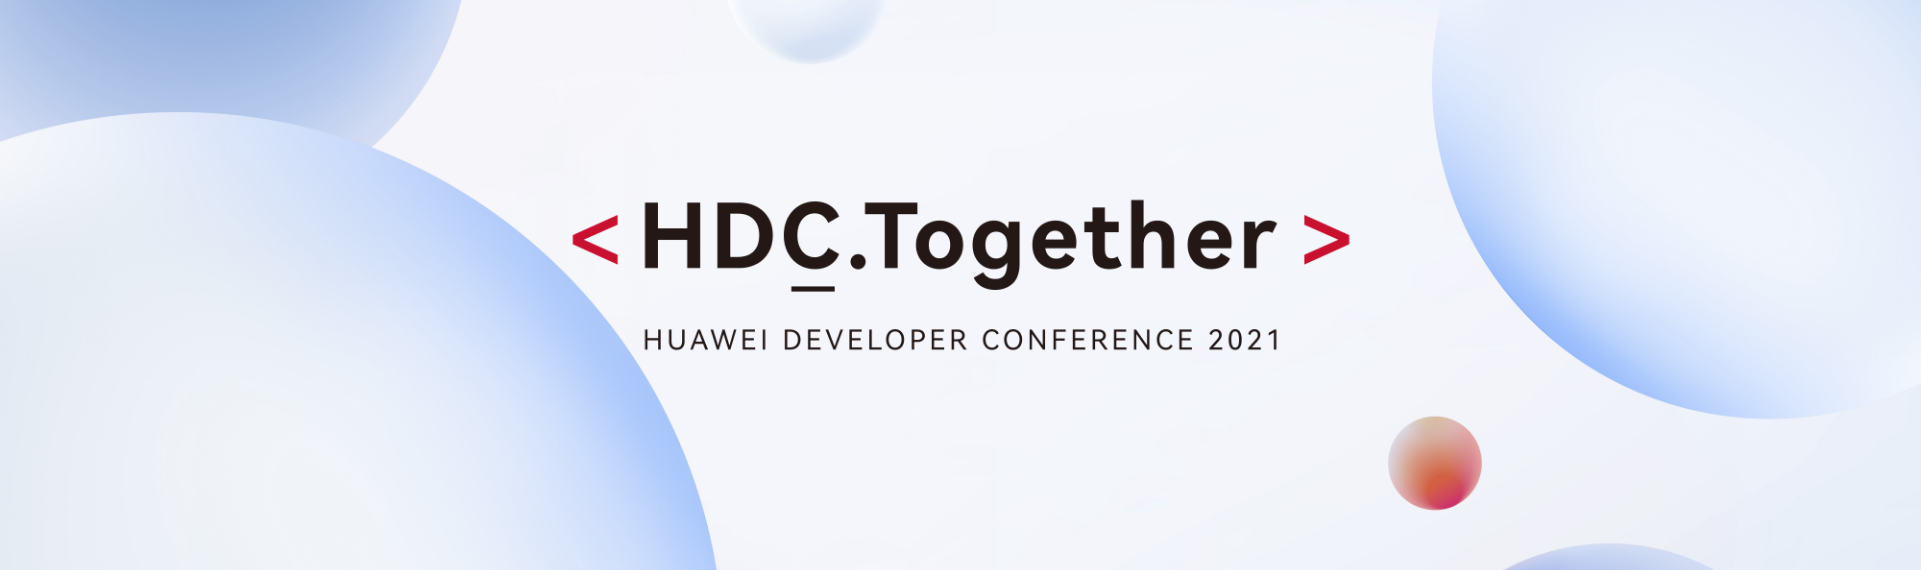 HDC Together